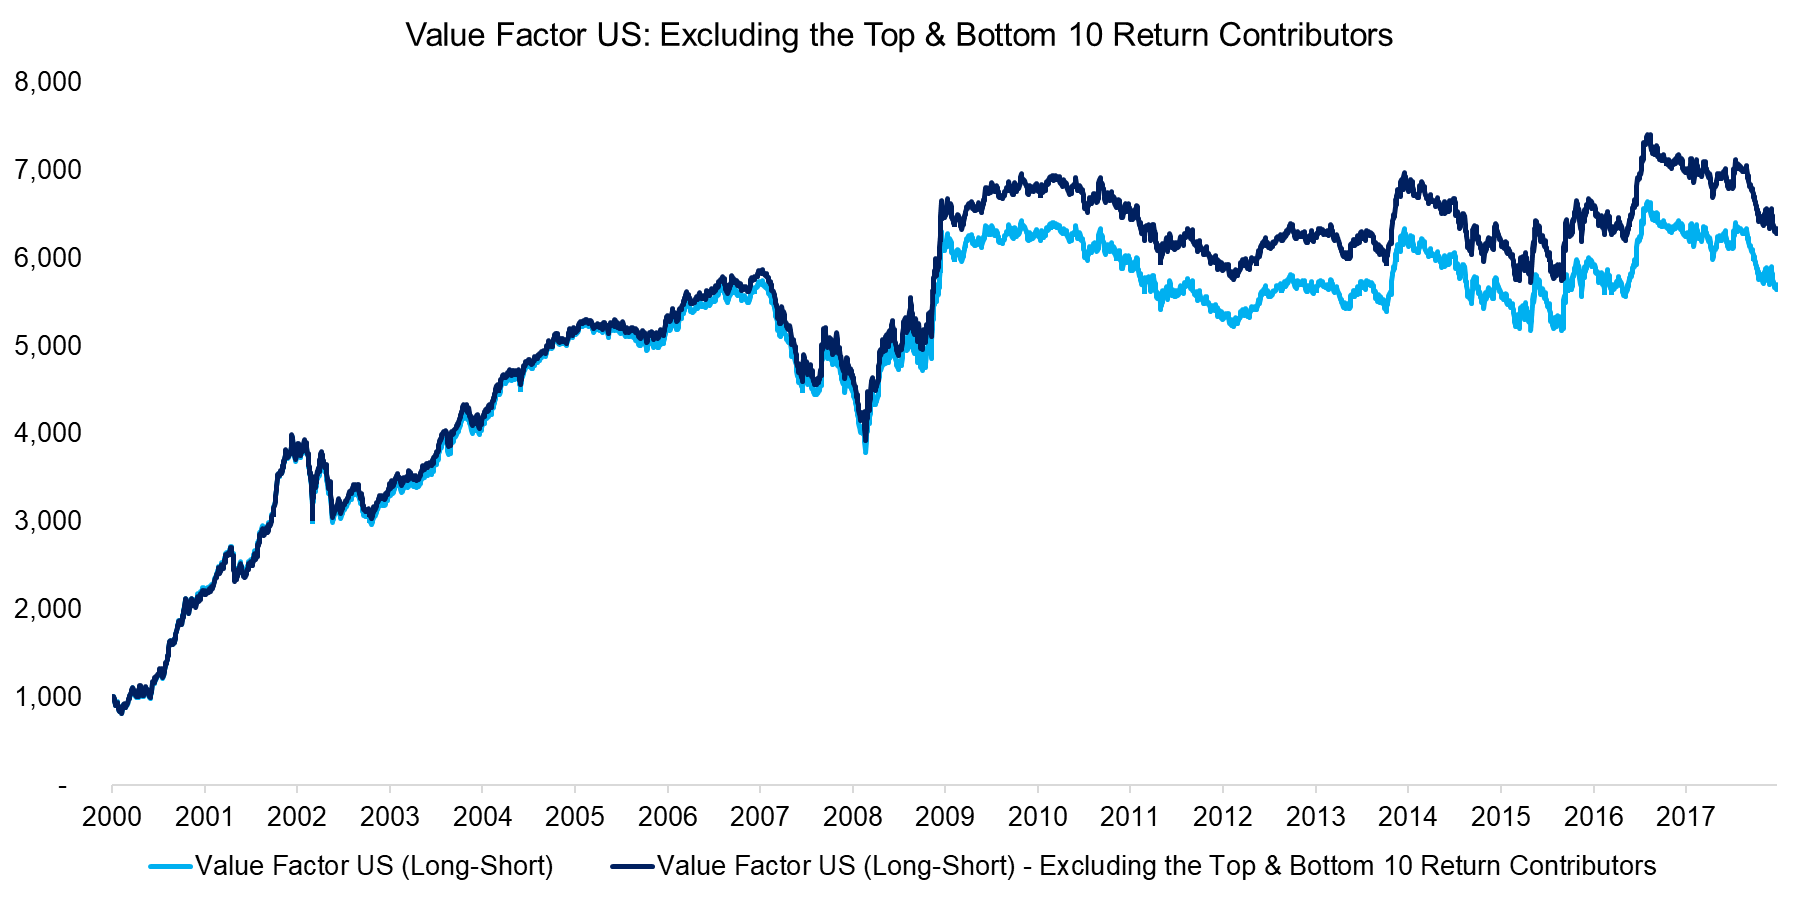 Value Factor US Excluding the Top & Bottom 10 Return Contributors